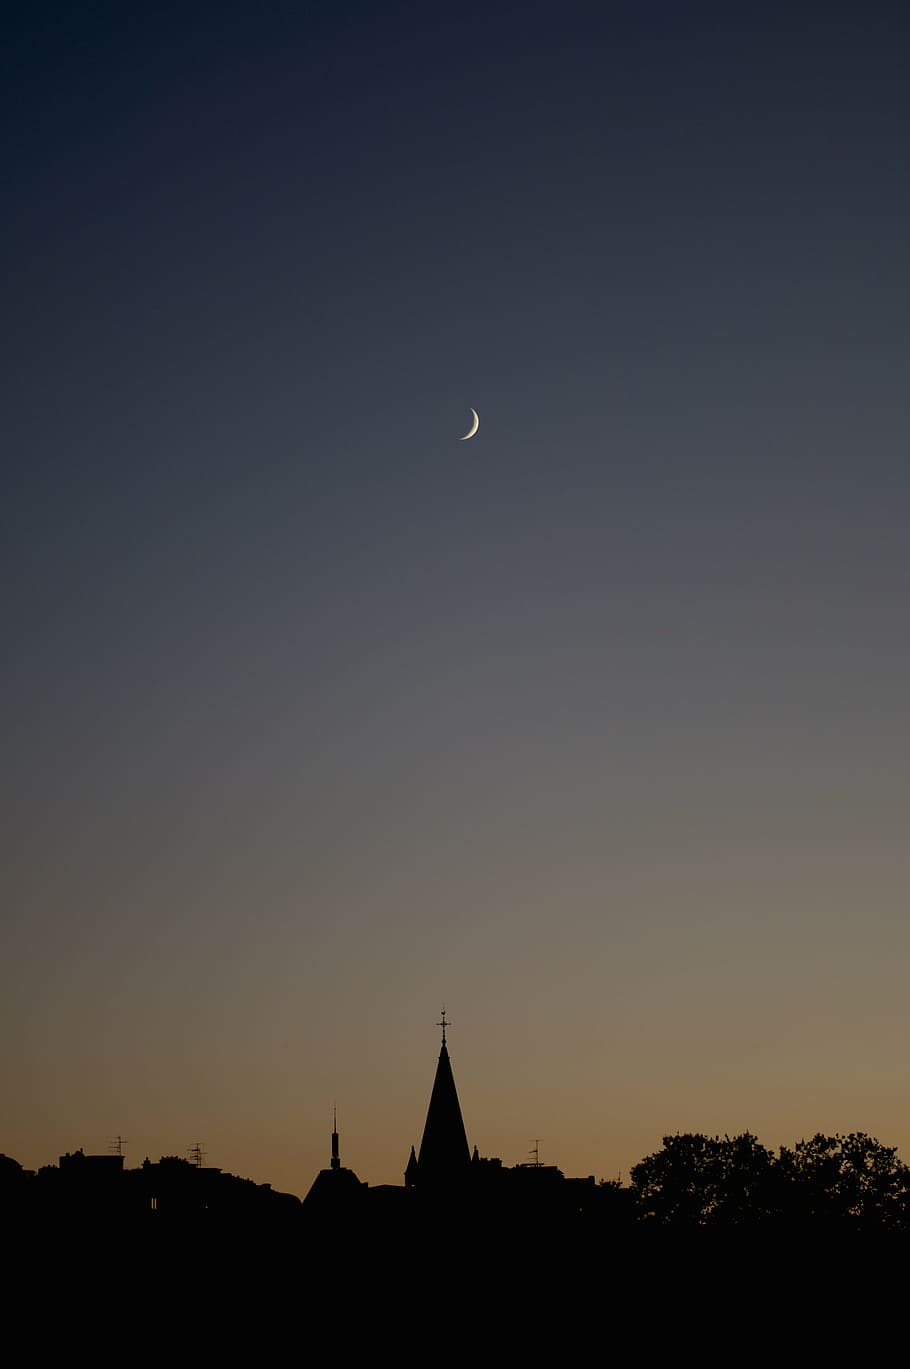 crescent moon, crescent, moon, night, time, architecture, building, structure, church, cathedral